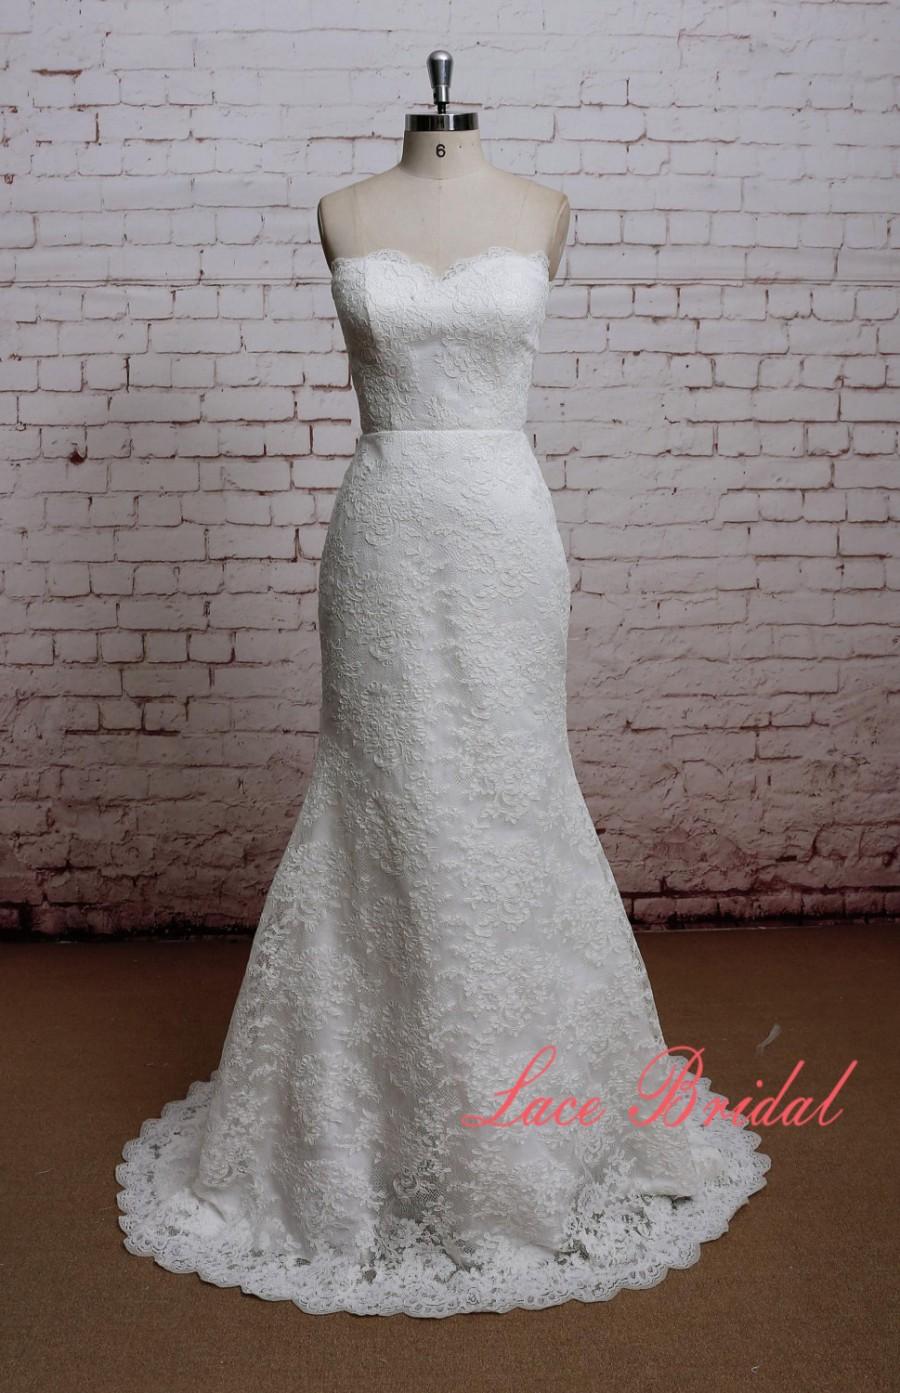 Hochzeit - New Style Wedding Dress Mermaid Style Bridal Gown Classic Lace Wedding Gown Full Lace Skirt Dress